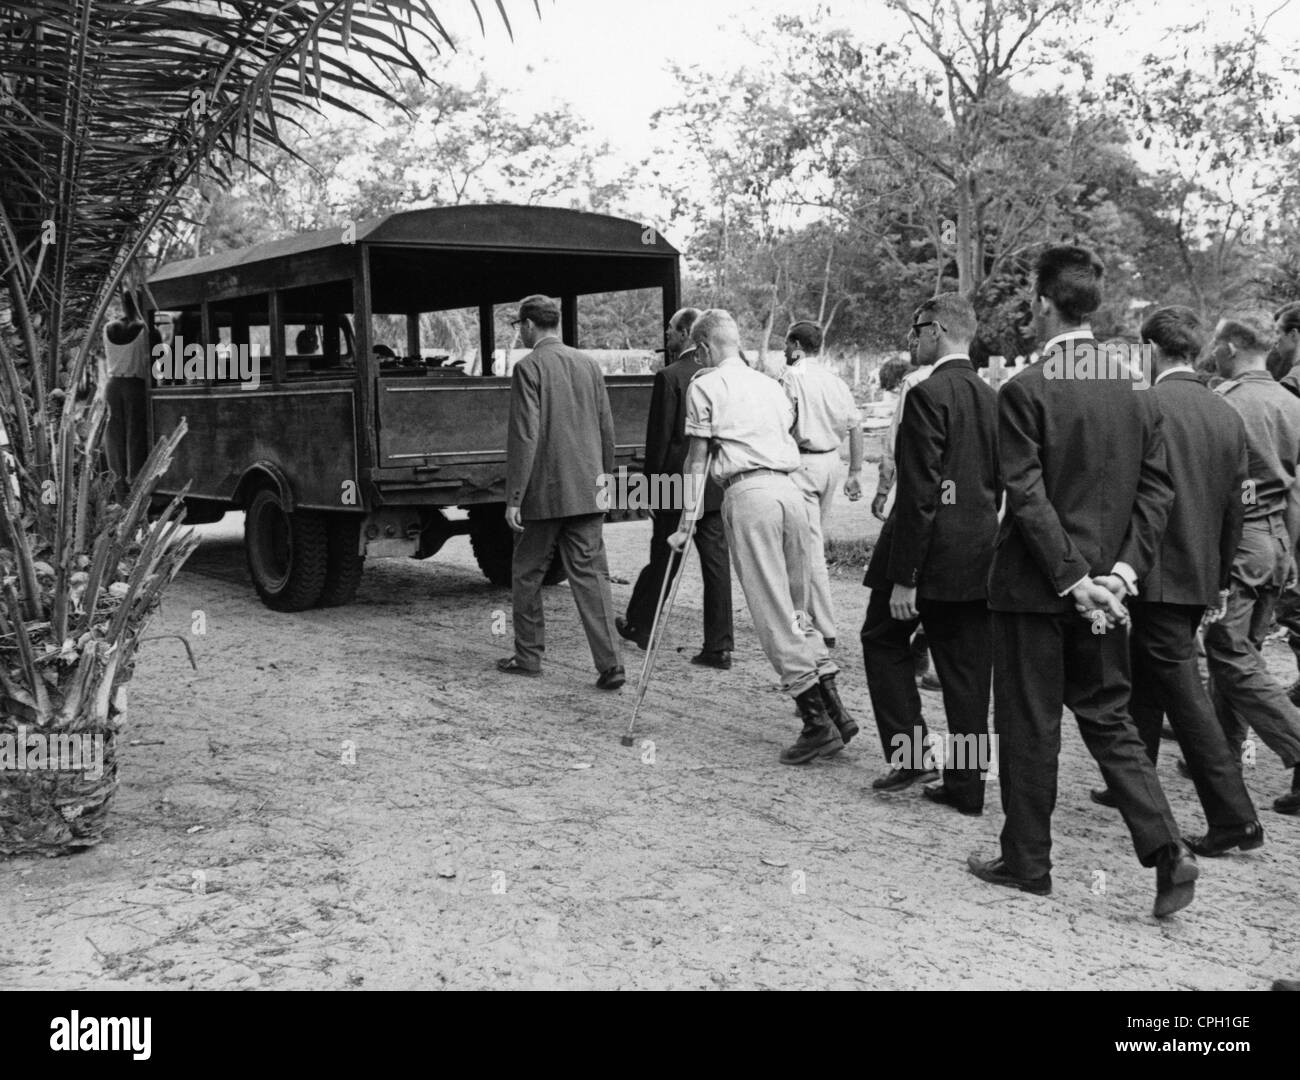 geography/travel, Congo, events, Simba uprising 1964 - 1965, funeral of the killed mercenary Ernest Young from Rhodesia, procession, Leopoldville, 6.10.1964, mercenaries, Democratic Republic of the Congo, Congo Crisis, Civil War, military, Africa, 20th century, historic, historical, 1960s, people, Additional-Rights-Clearences-Not Available Stock Photo